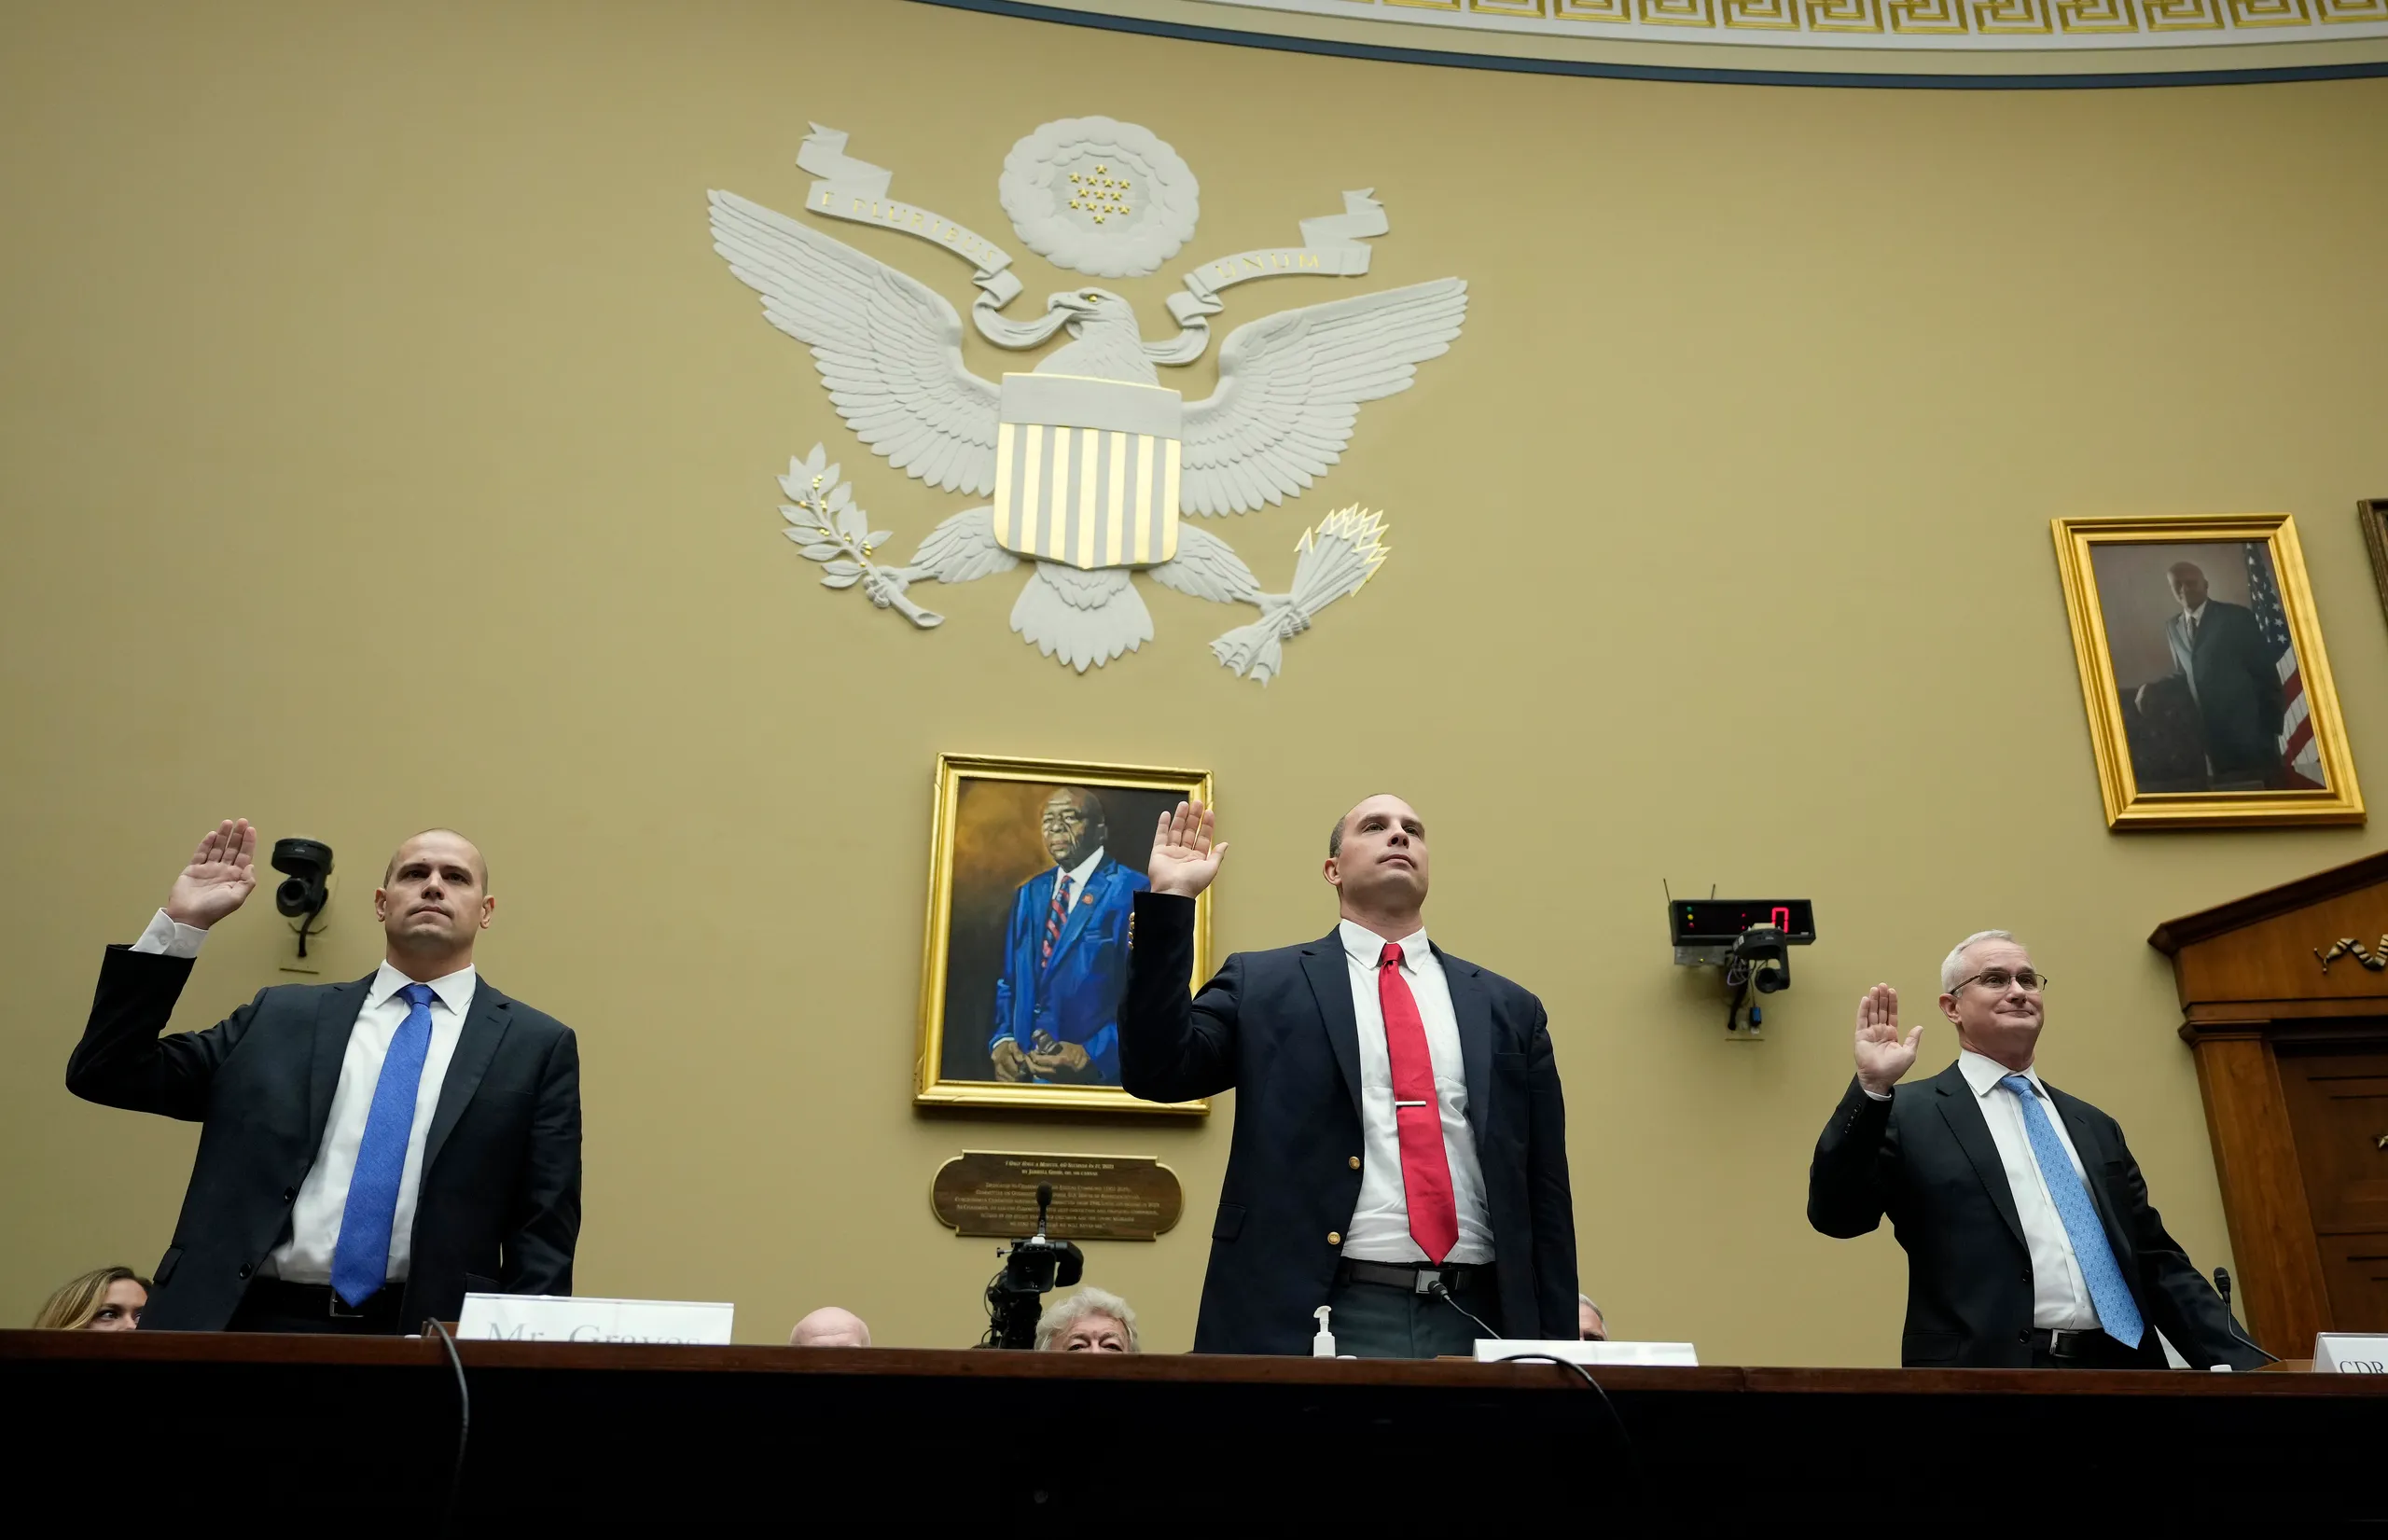 Ryan Graves, David Grusch and David Fravor are sworn in during the House Oversight Committee hearing on UAPs